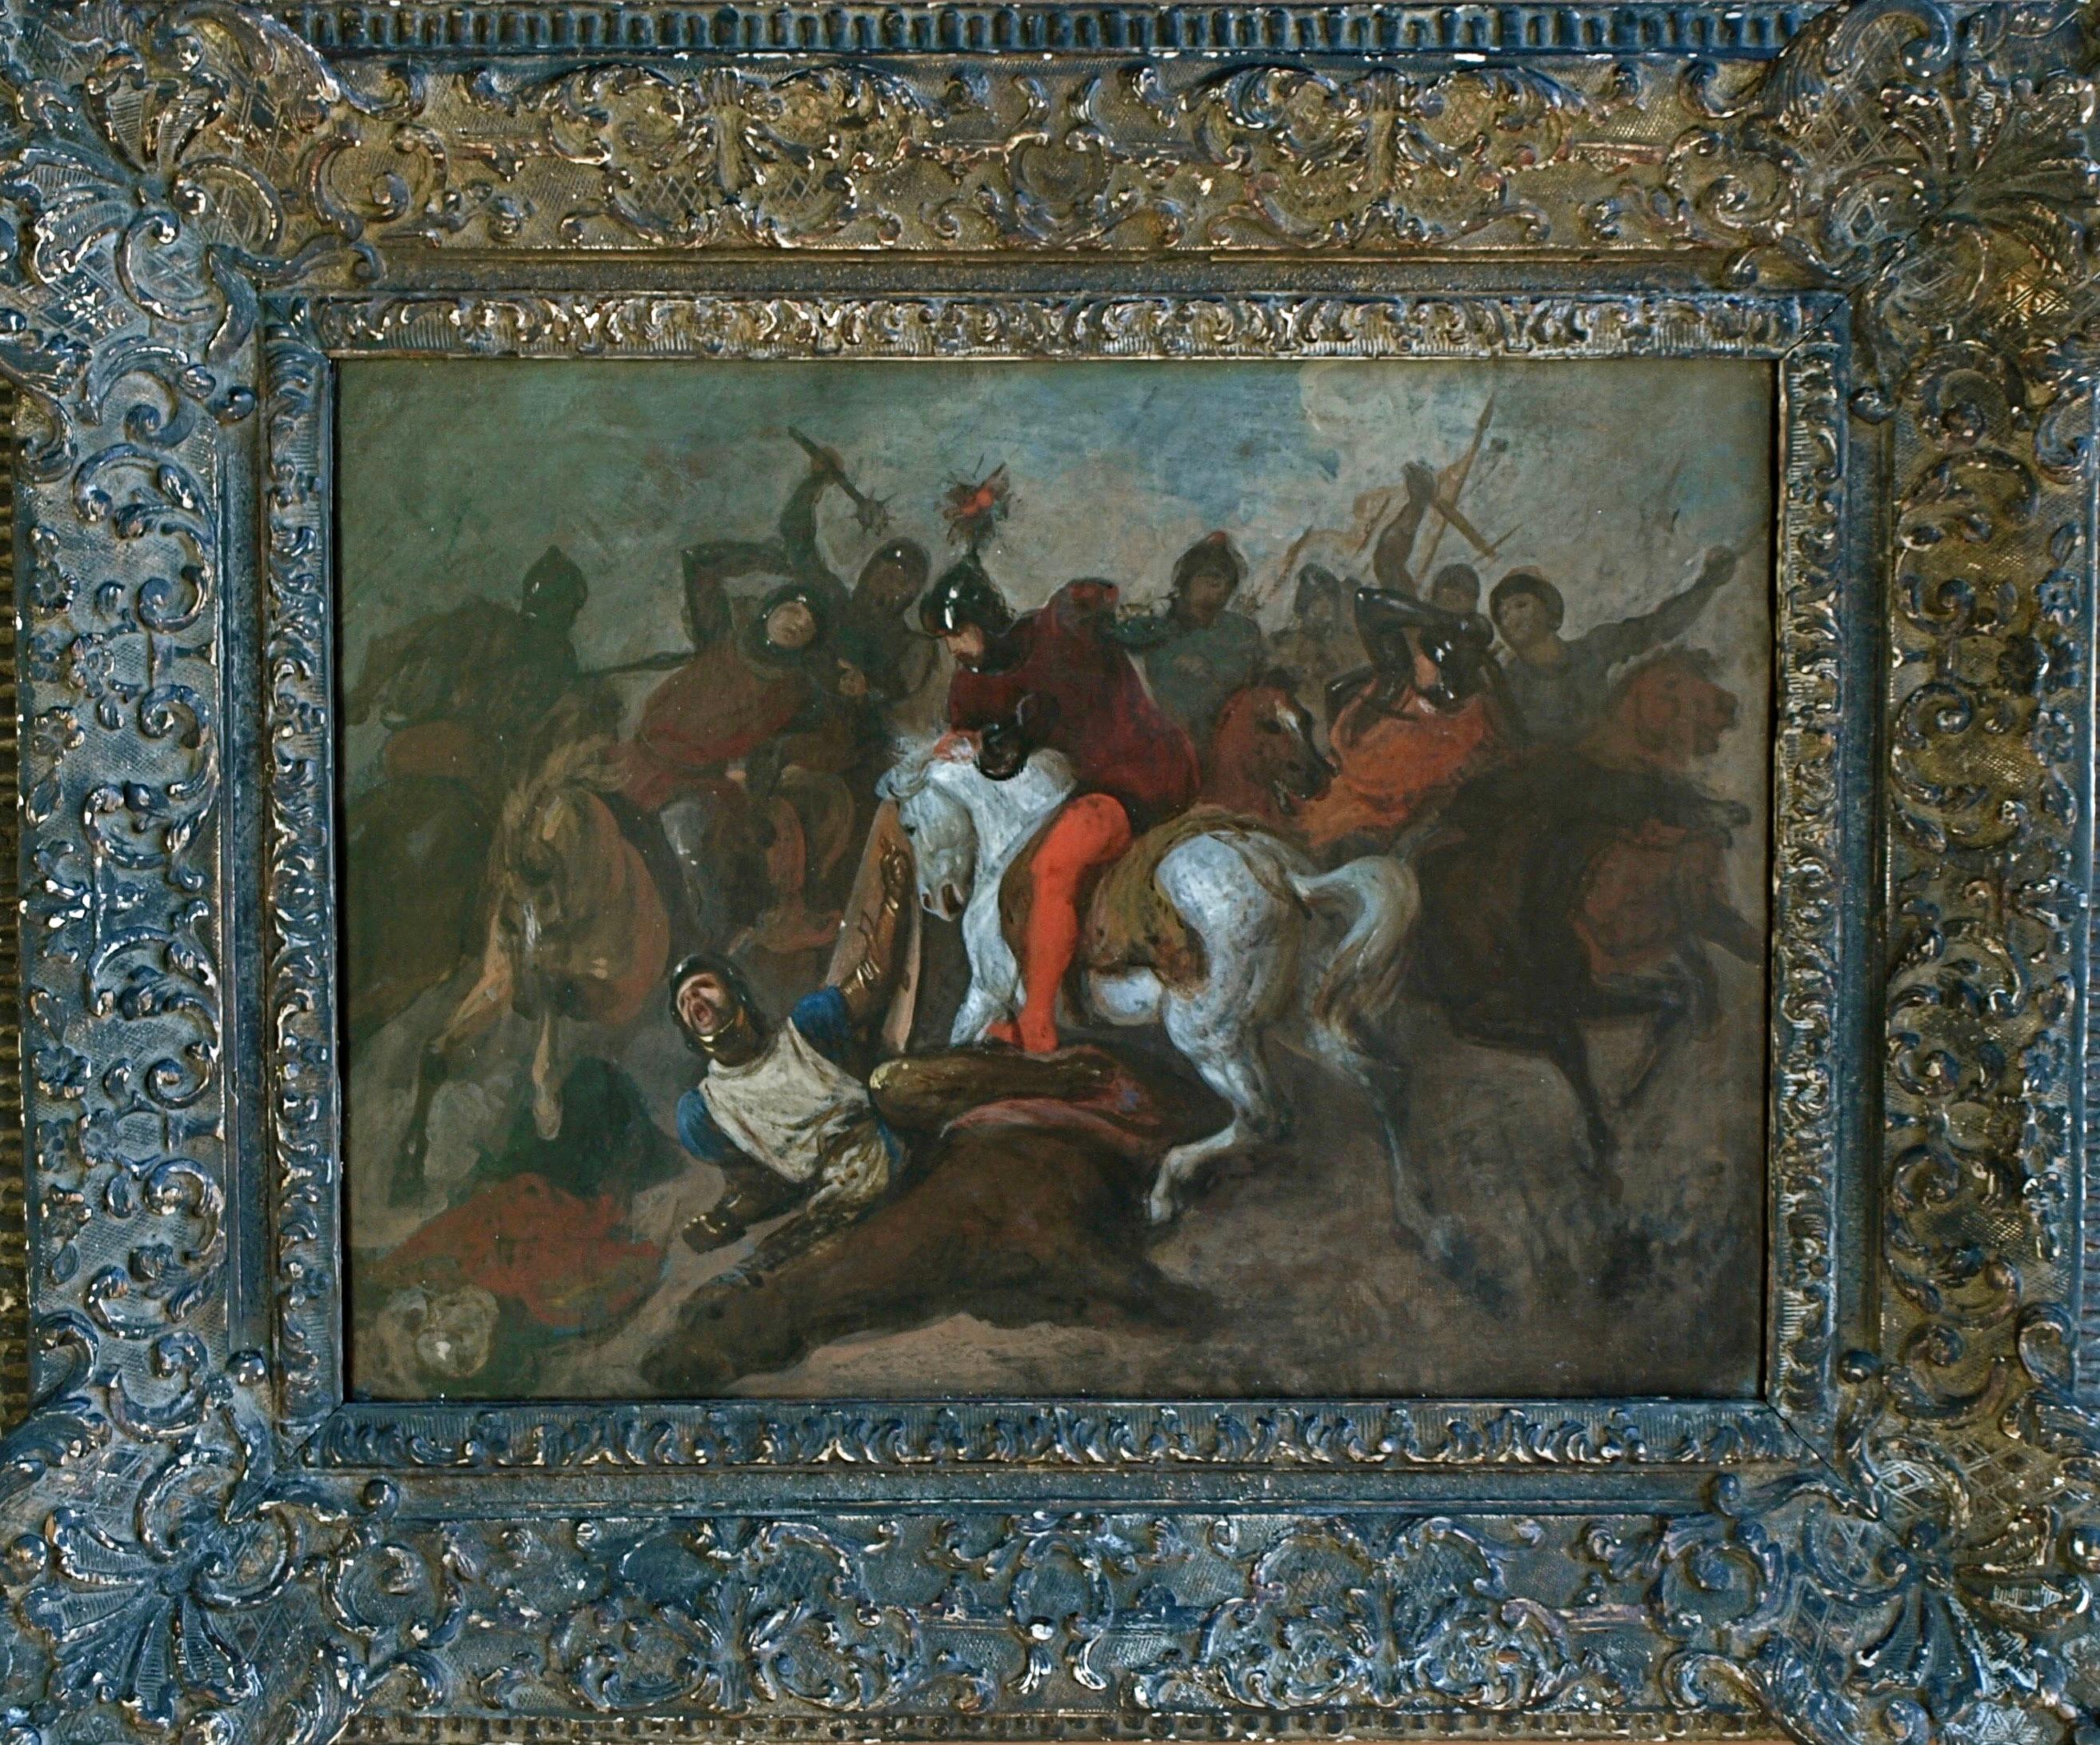 The Battle - Soldiers riding horses in the heat of a violent battle 19th century - Painting by Eugene Delacroix (manner of)